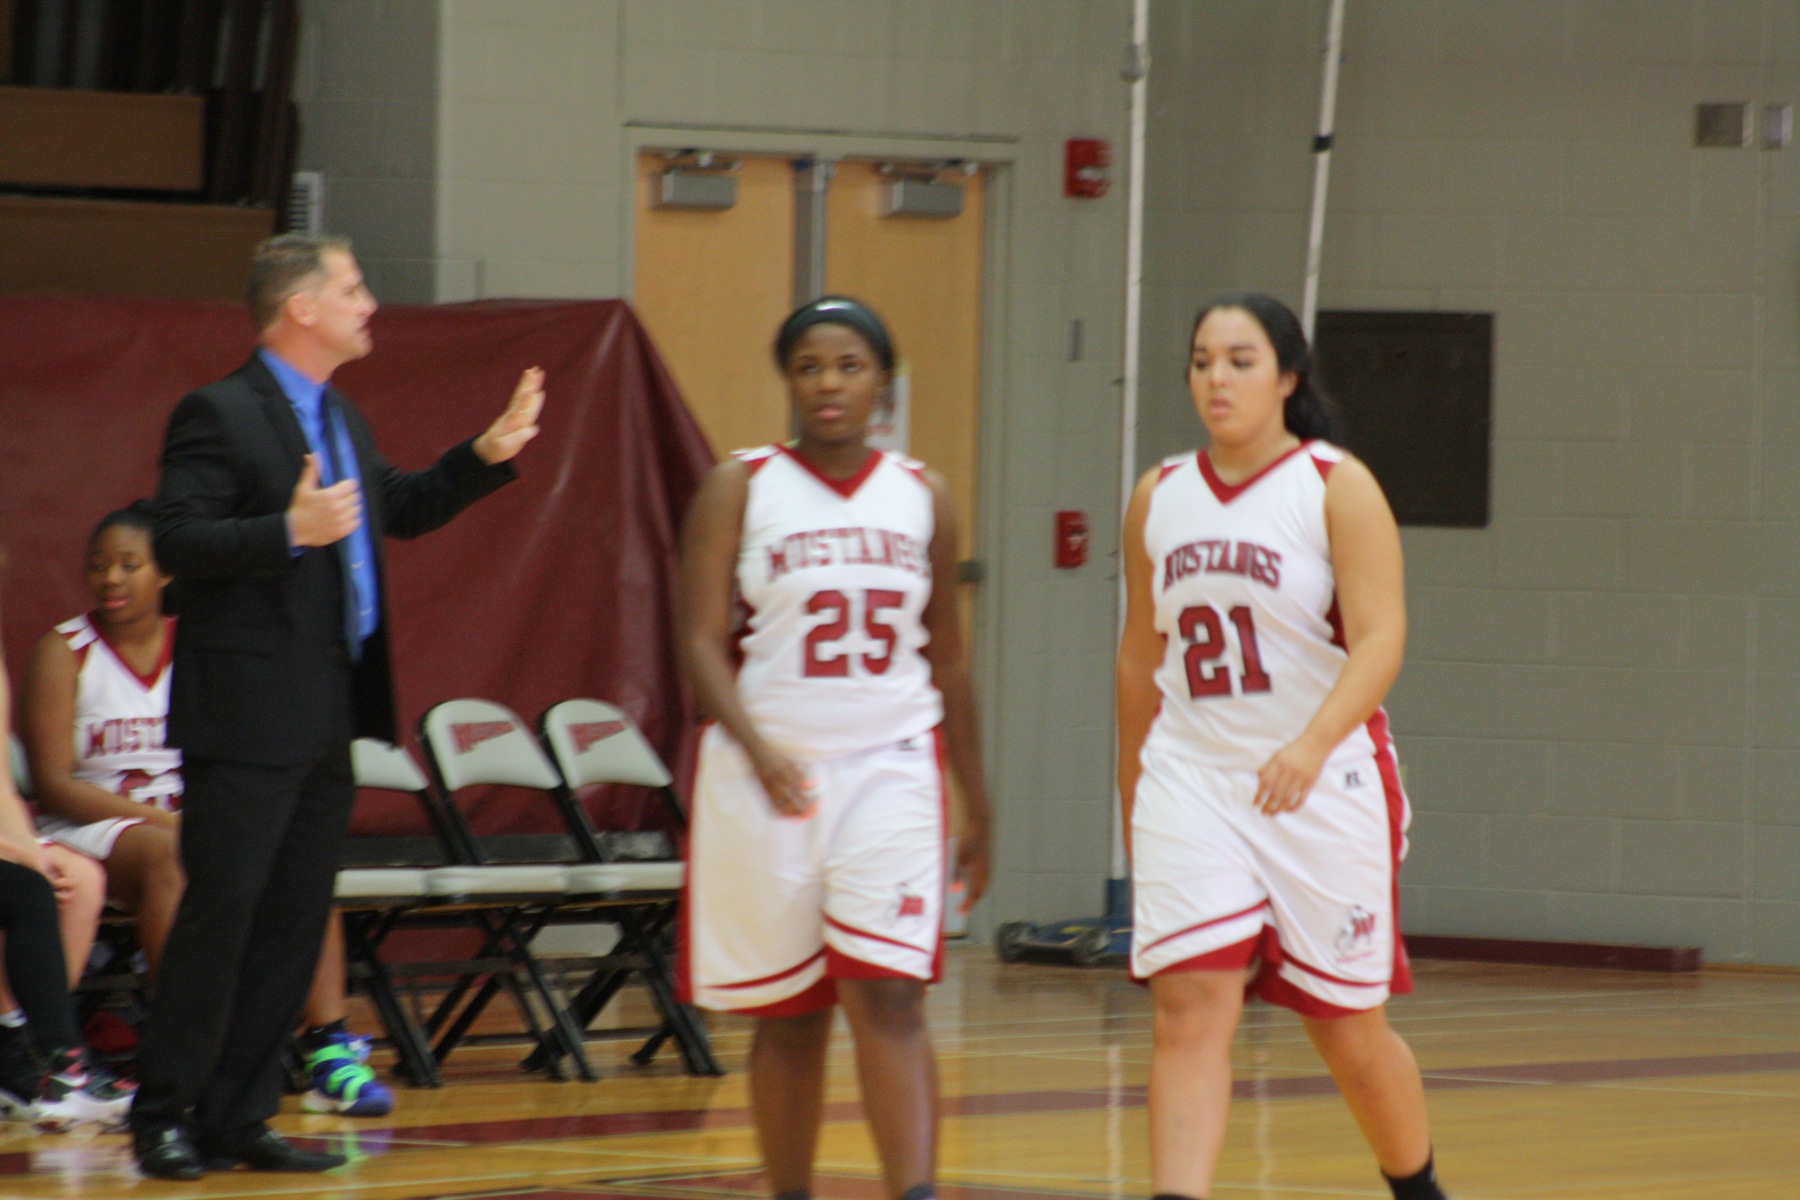 Women's Basketball: Mustangs Lose to Dukes